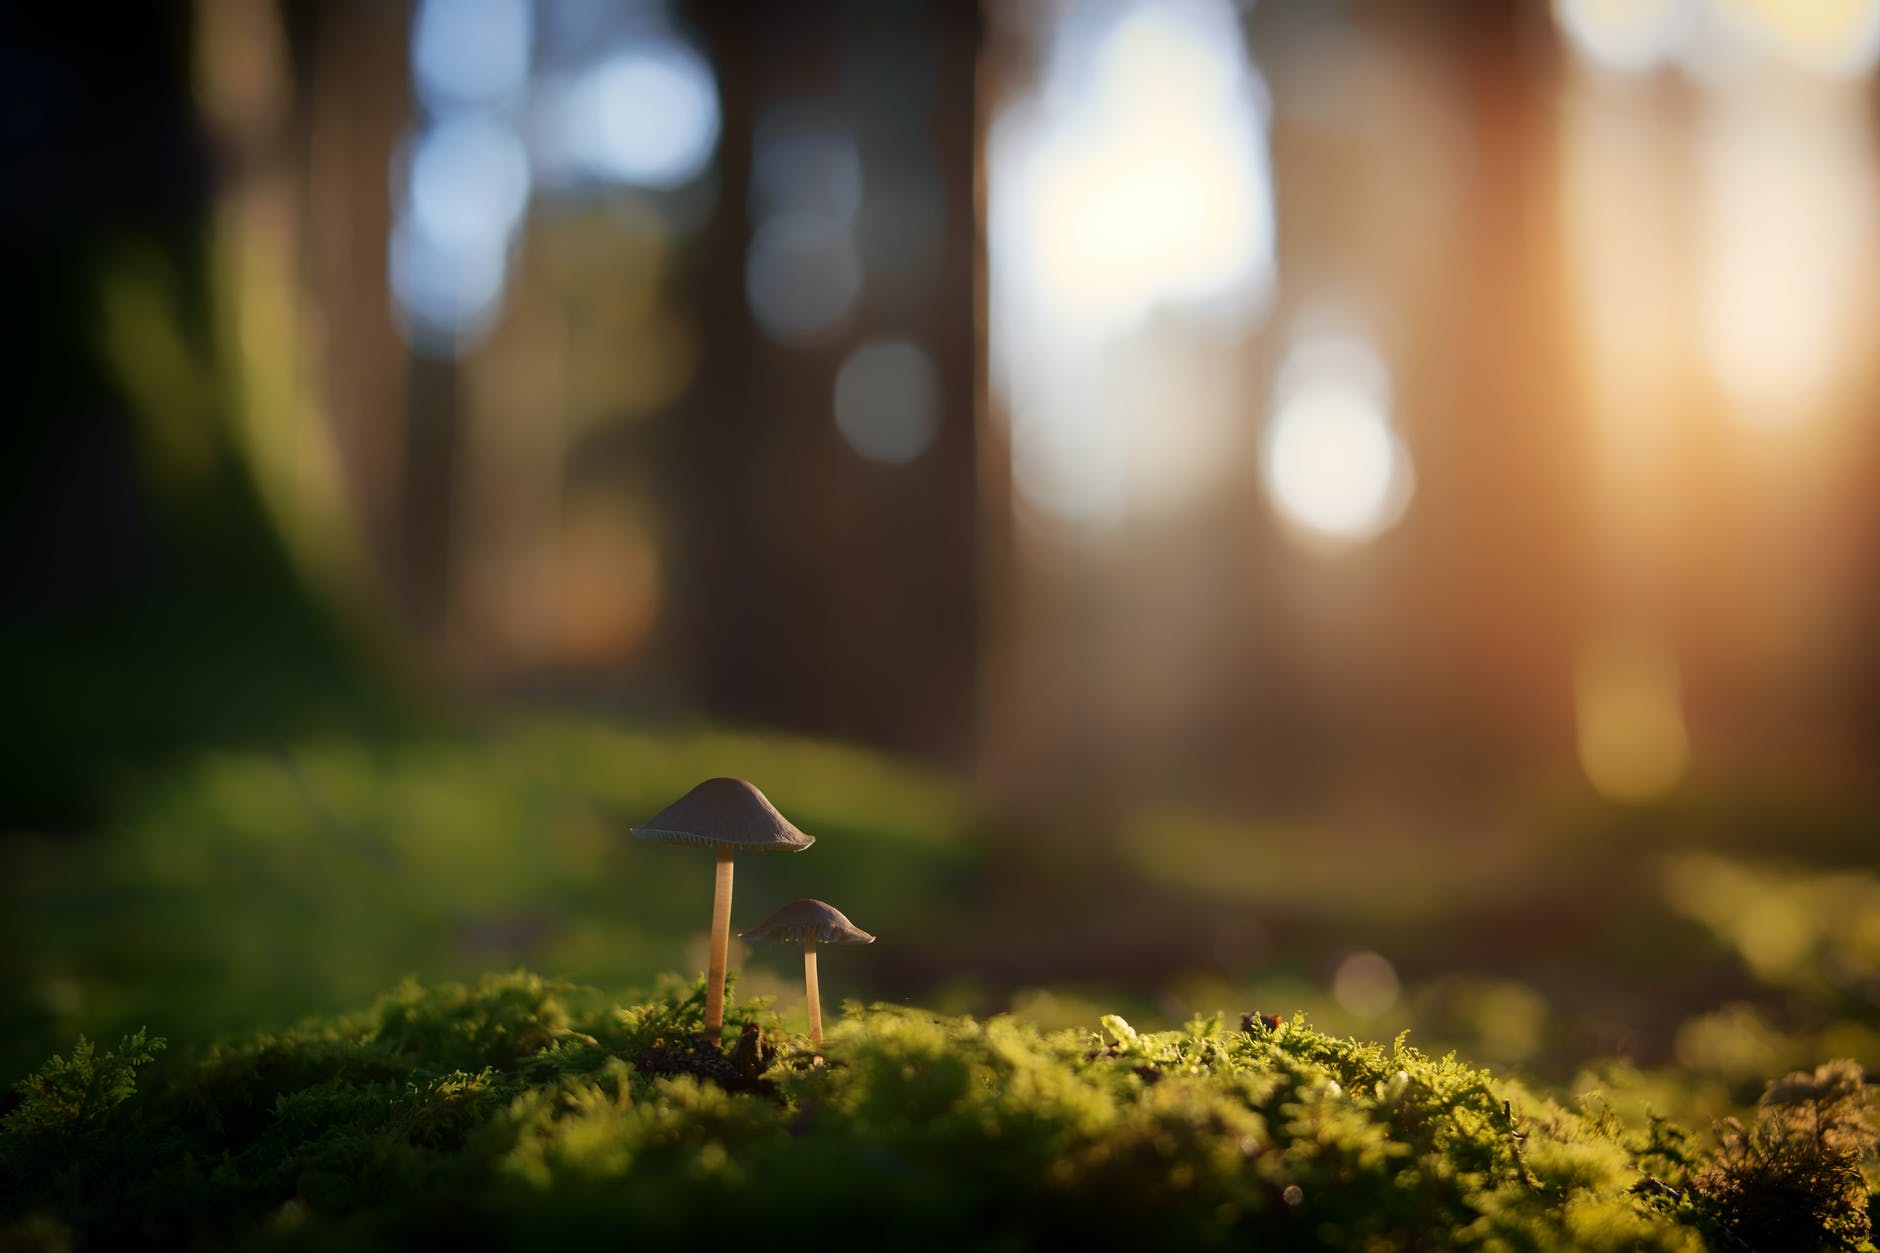 shallow focus photography of brown mushrooms